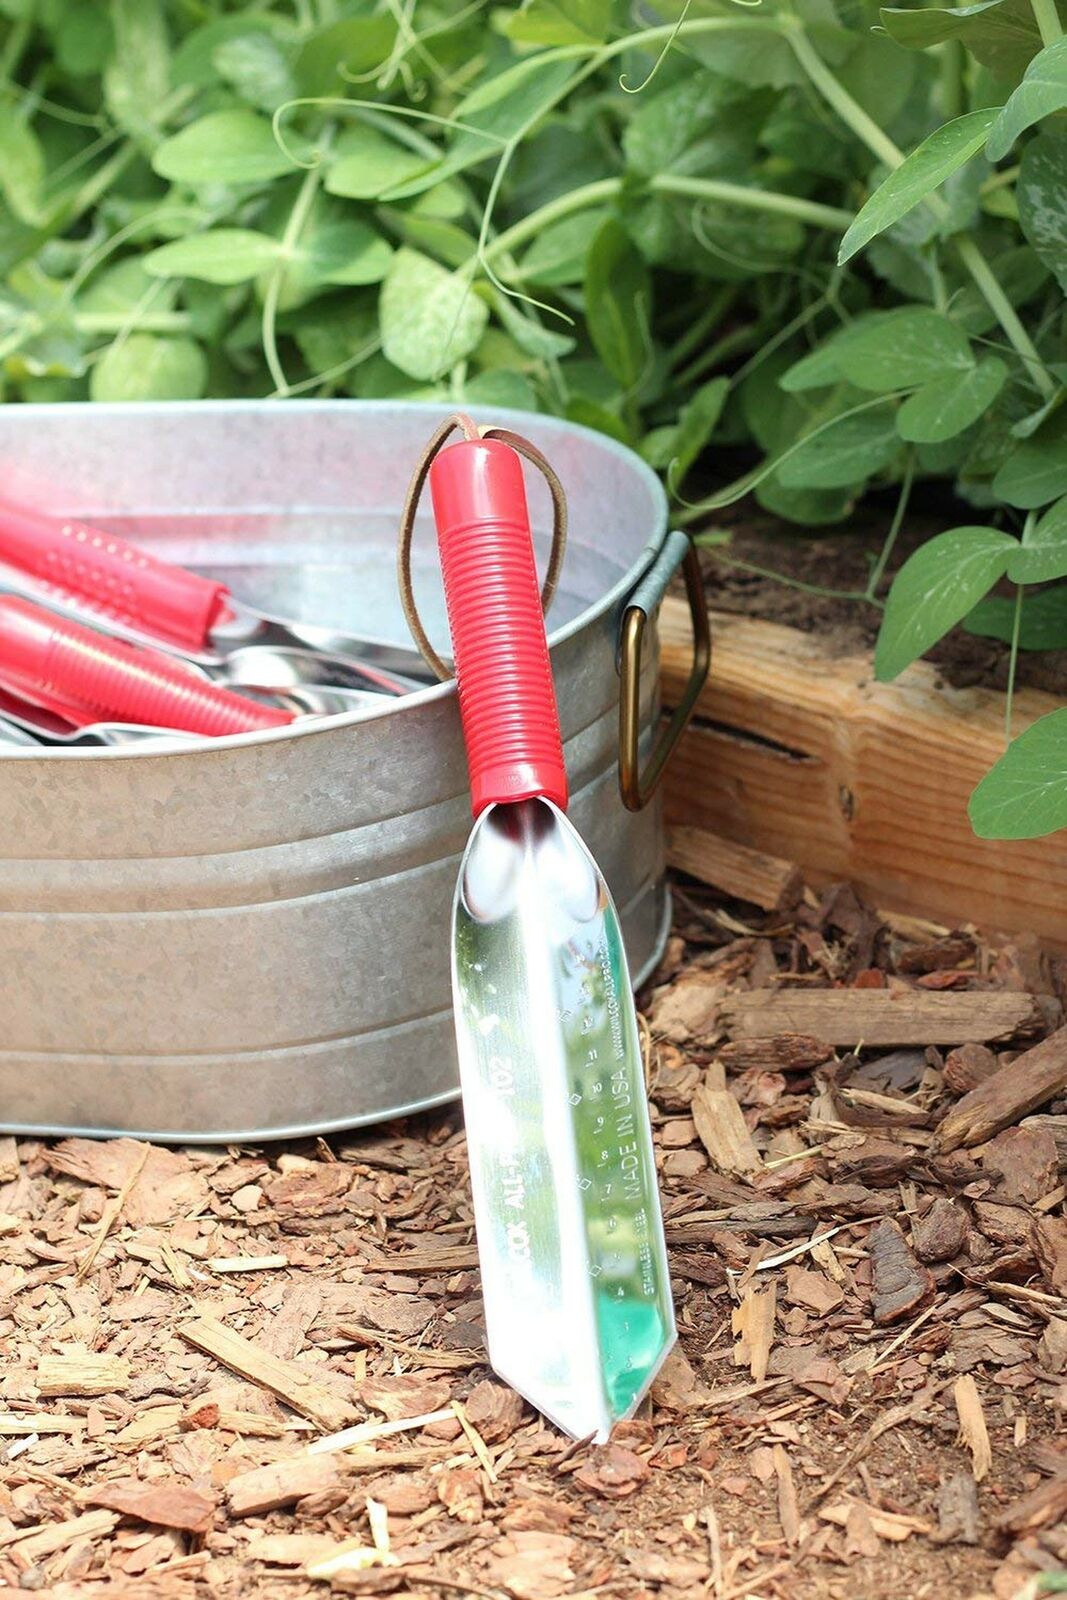 Wilcox 12 inch stainless steel trowel with red handle and leather wrist strap